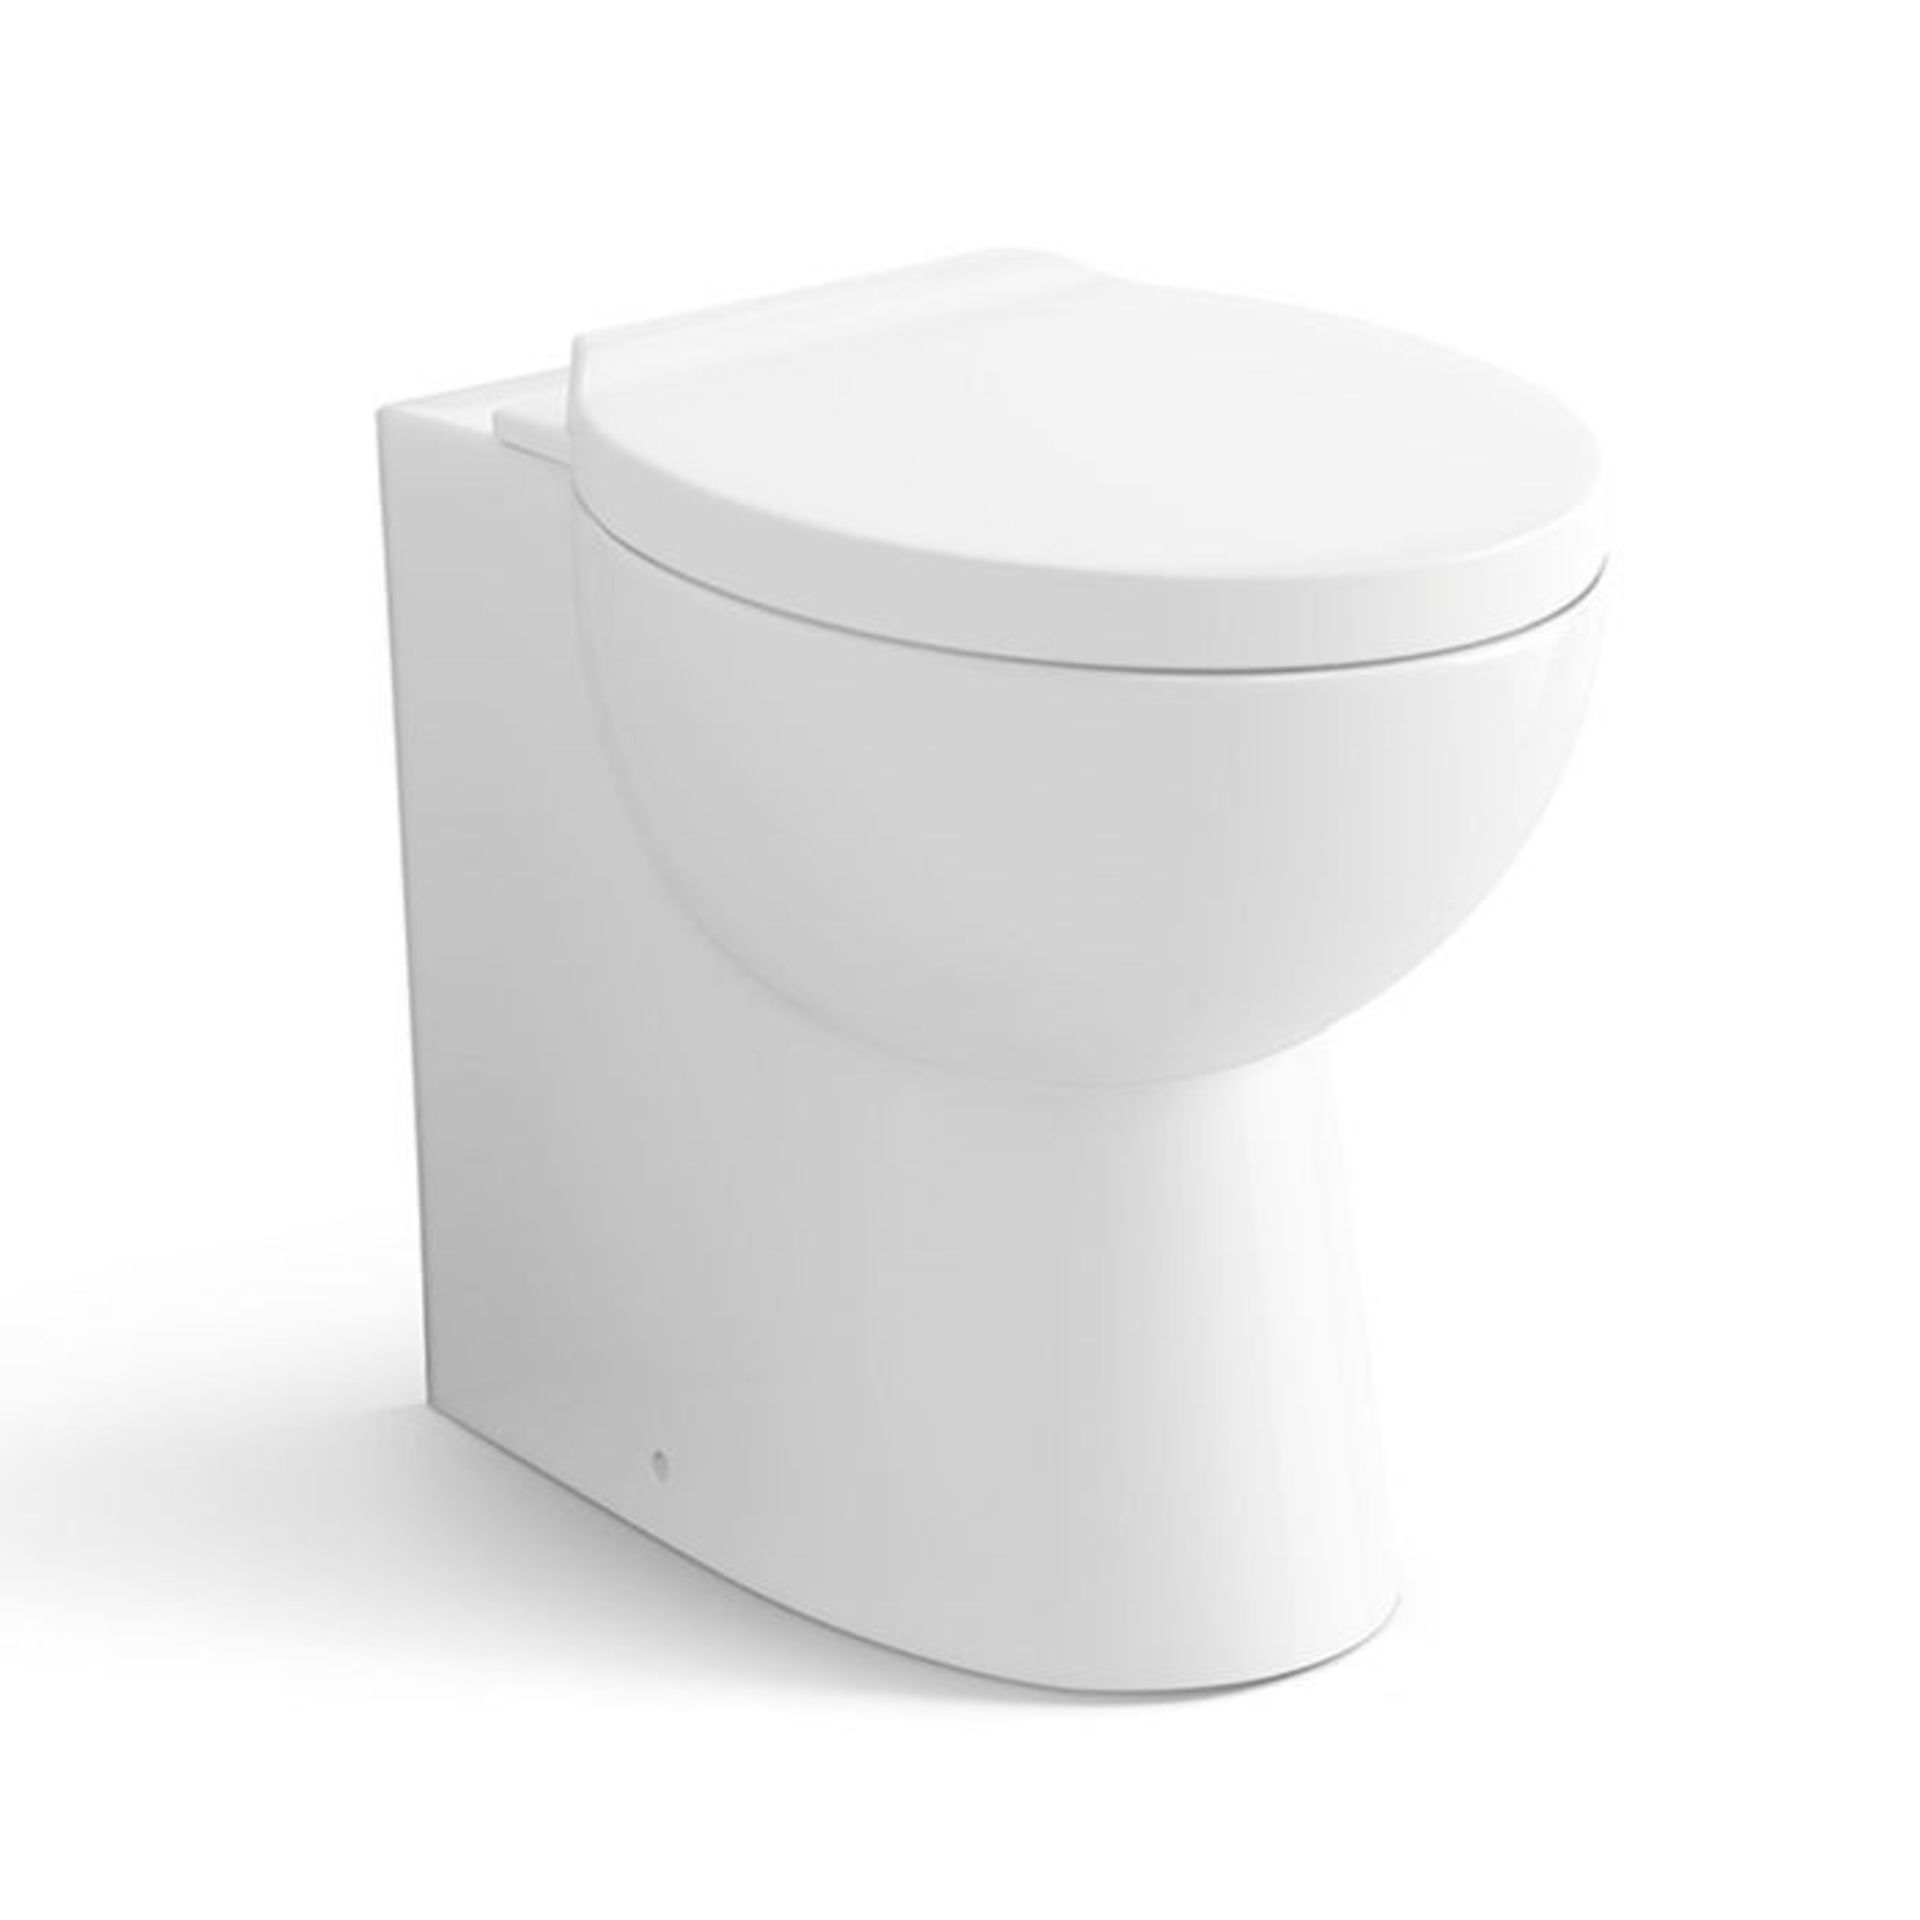 Quartz Back to Wall Toilet.Stylish design Made from White Vitreous China Finished in a high glo... - Image 2 of 3